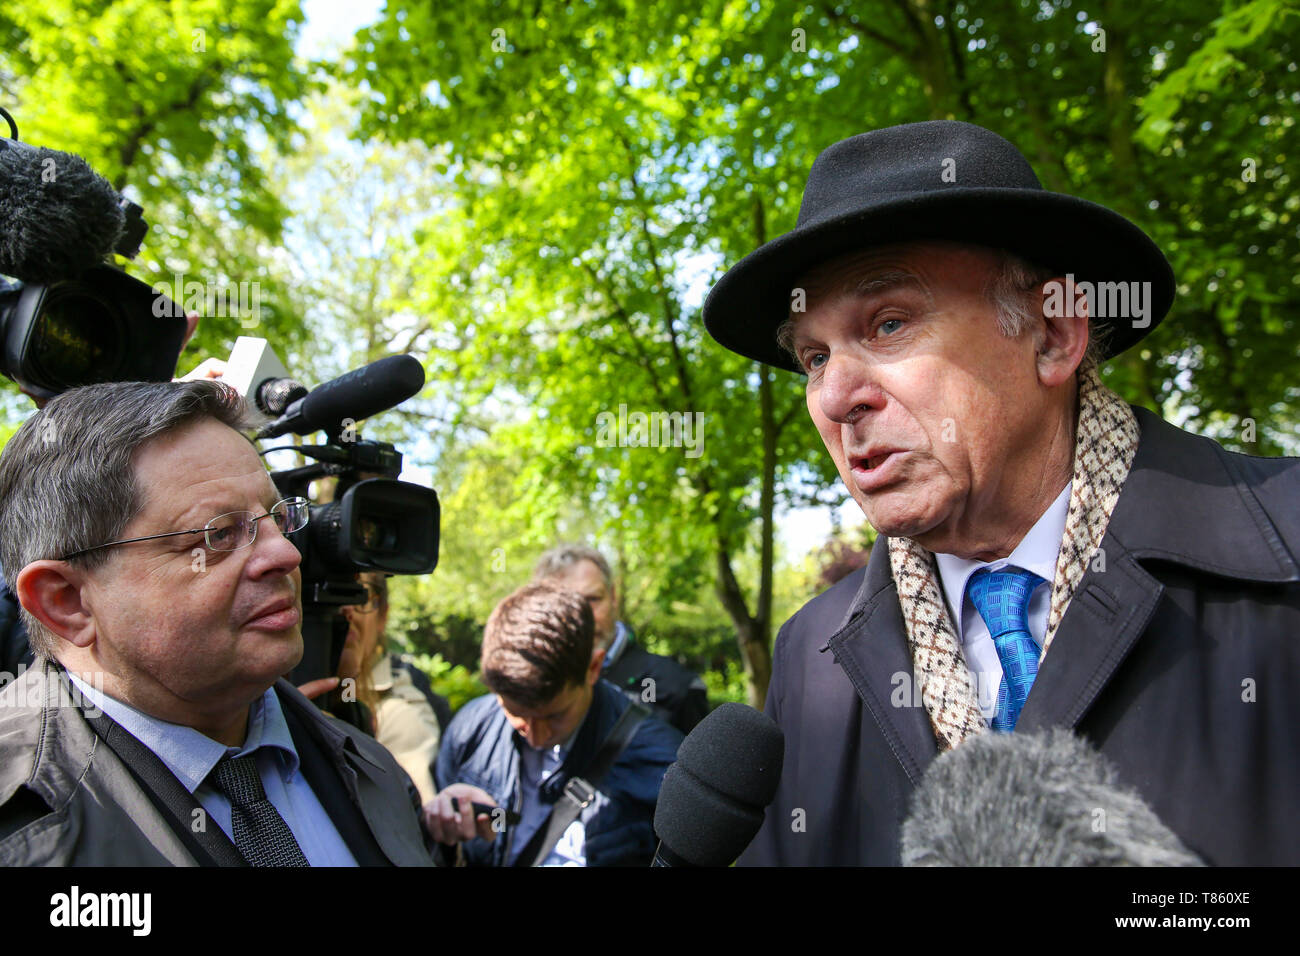 The leader of Liberal Democrats Vince Cable is seen speaking to the media  during the forthcoming European Union election campaign. Britain must hold European Parliament elections on 23rd May 2019 or leave the European Union with no deal on 1st June after Brexit was delayed until 31st October 2019, as Prime Minister, Theresa May failed to get her Brexit deal approved by Parliament. Stock Photo